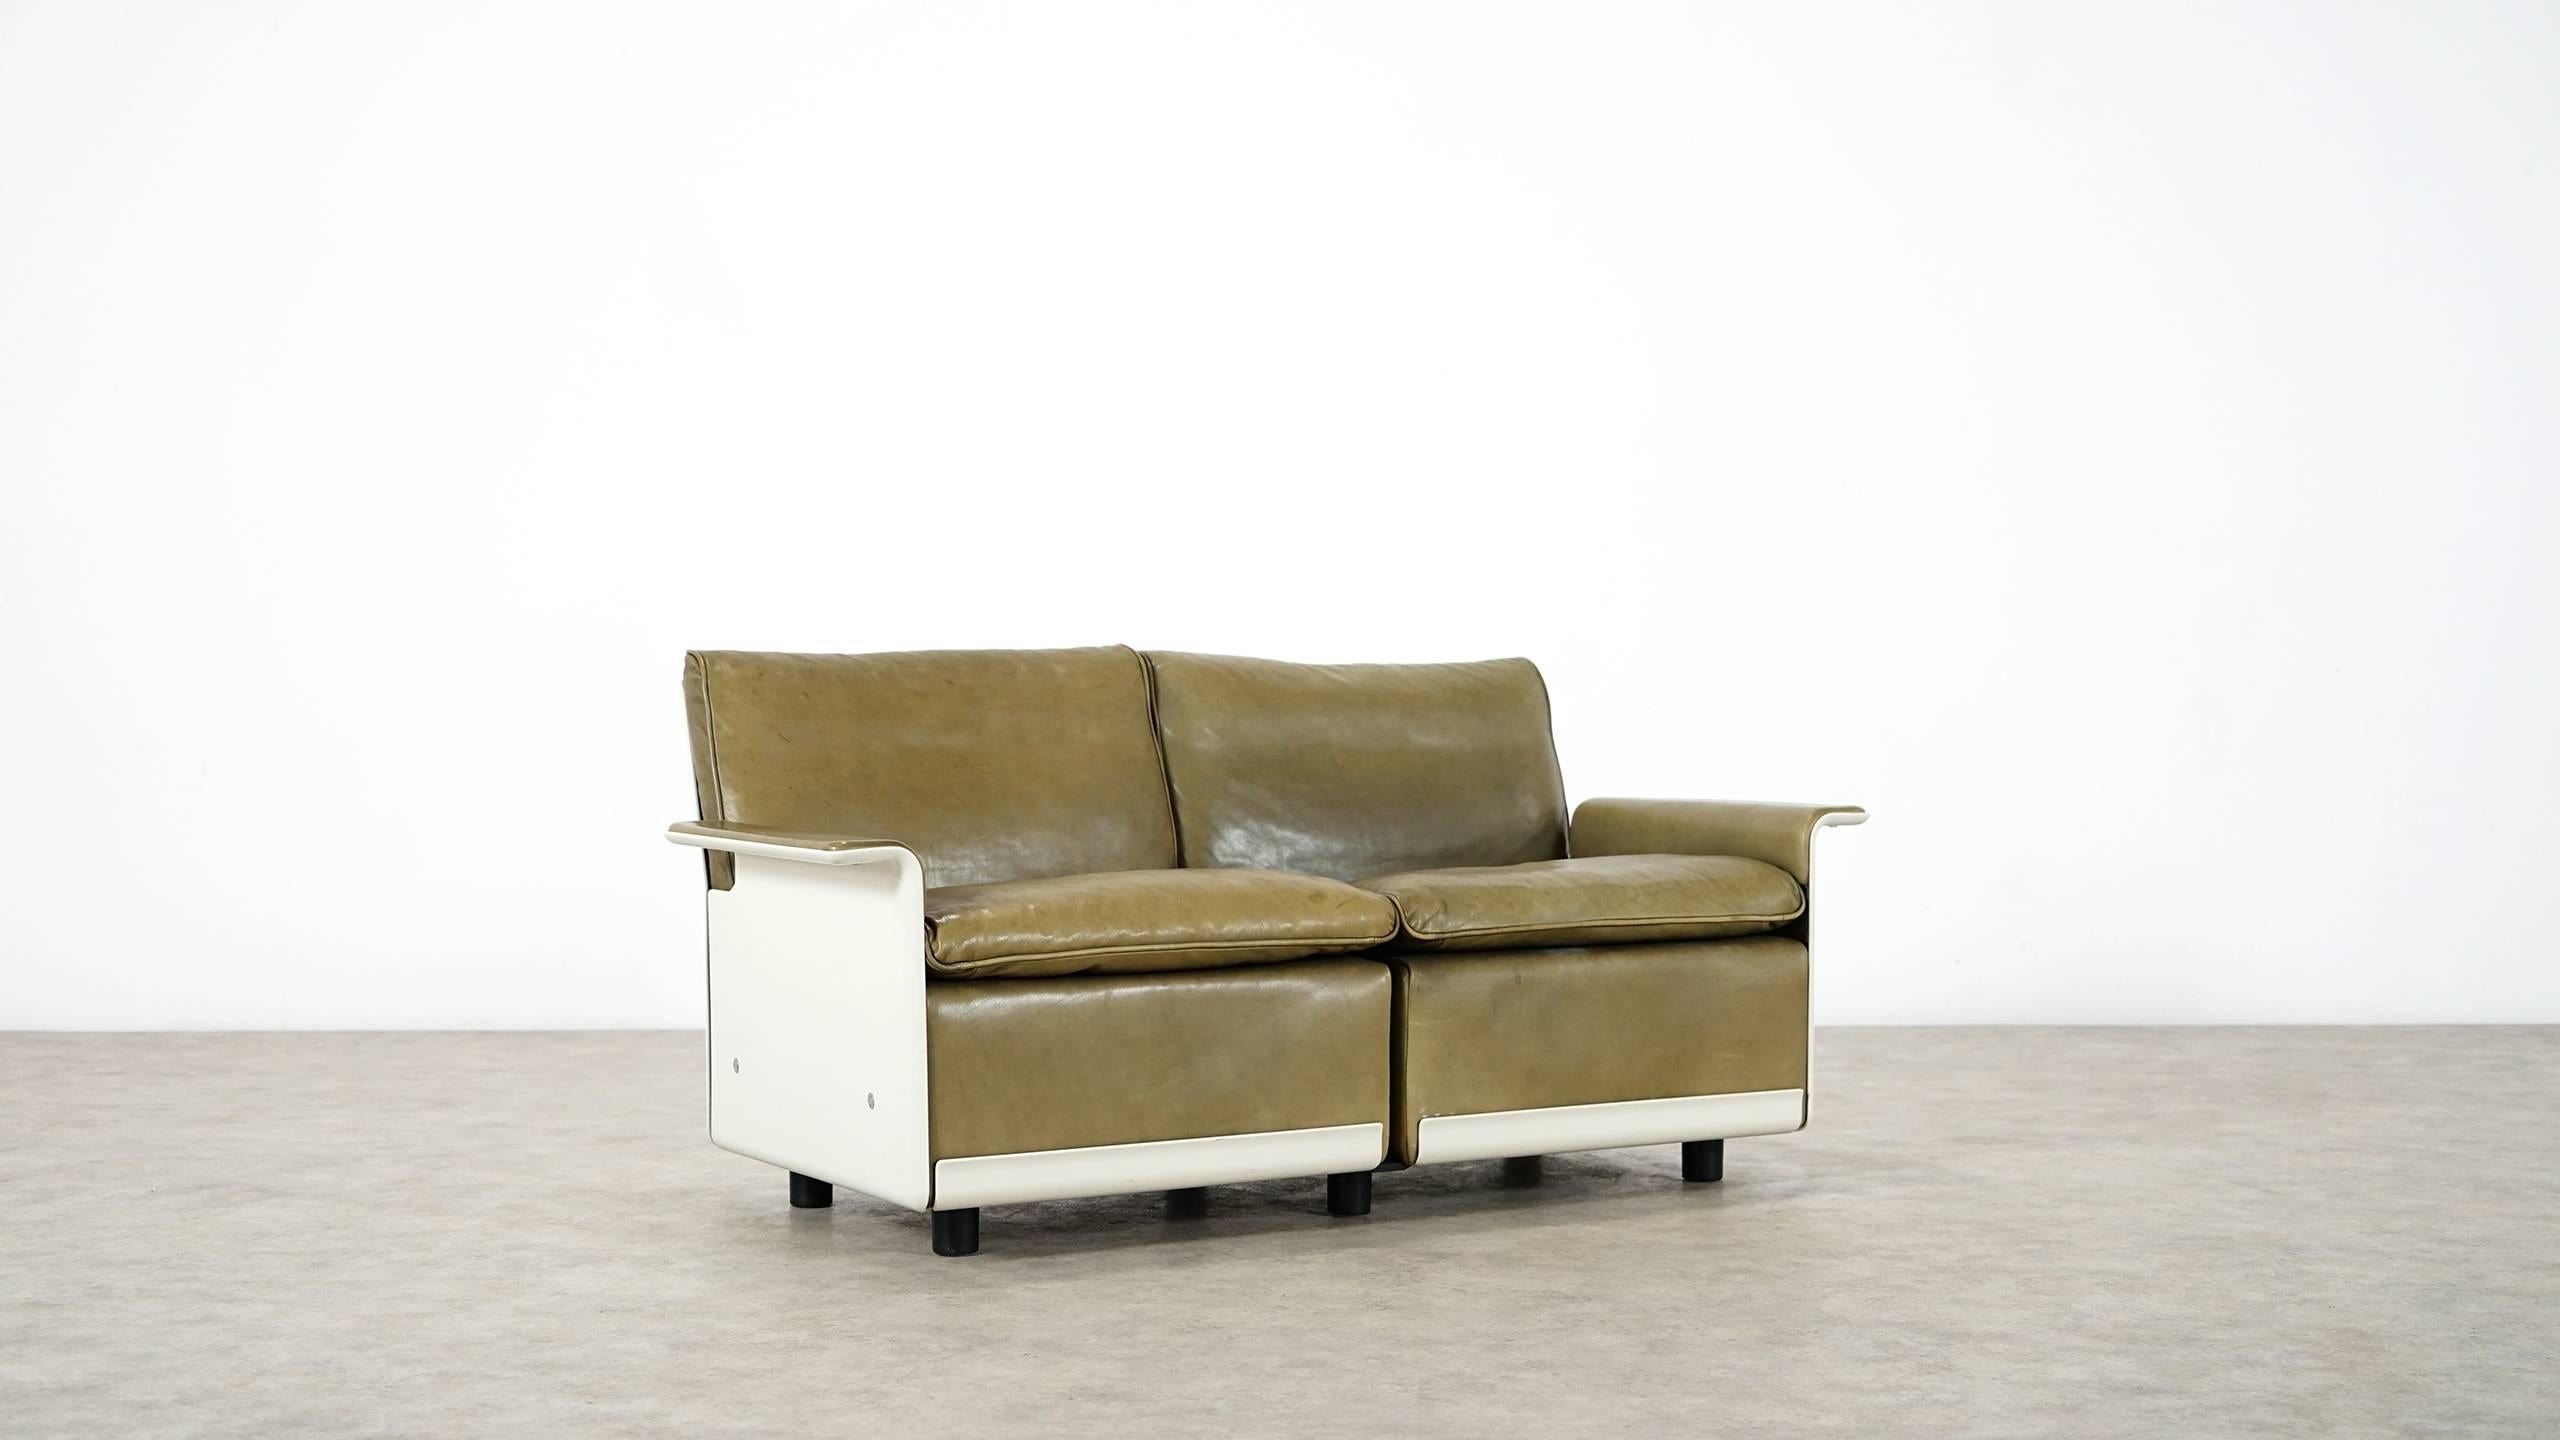 Dieter Rams, Sofa RZ 62 in Olivgreen Leather by Vitsœ, Two-Seat 8